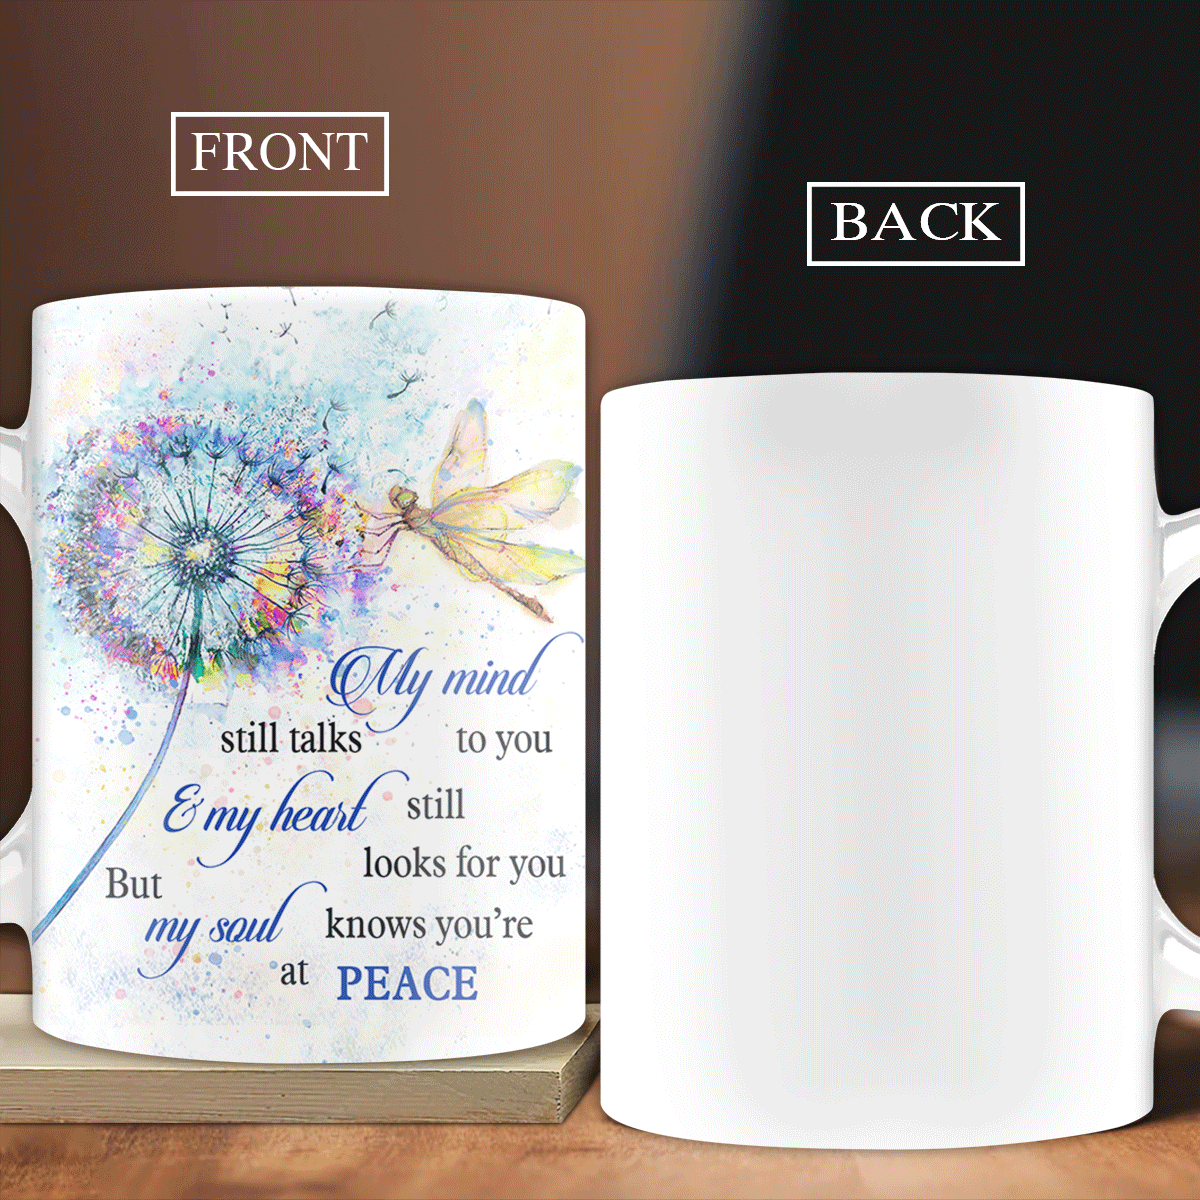 Memorial White Mug - Colorful dandelion, Dragonfly painting - Gift for members family - My mind still talks to you - Heaven White Mug.